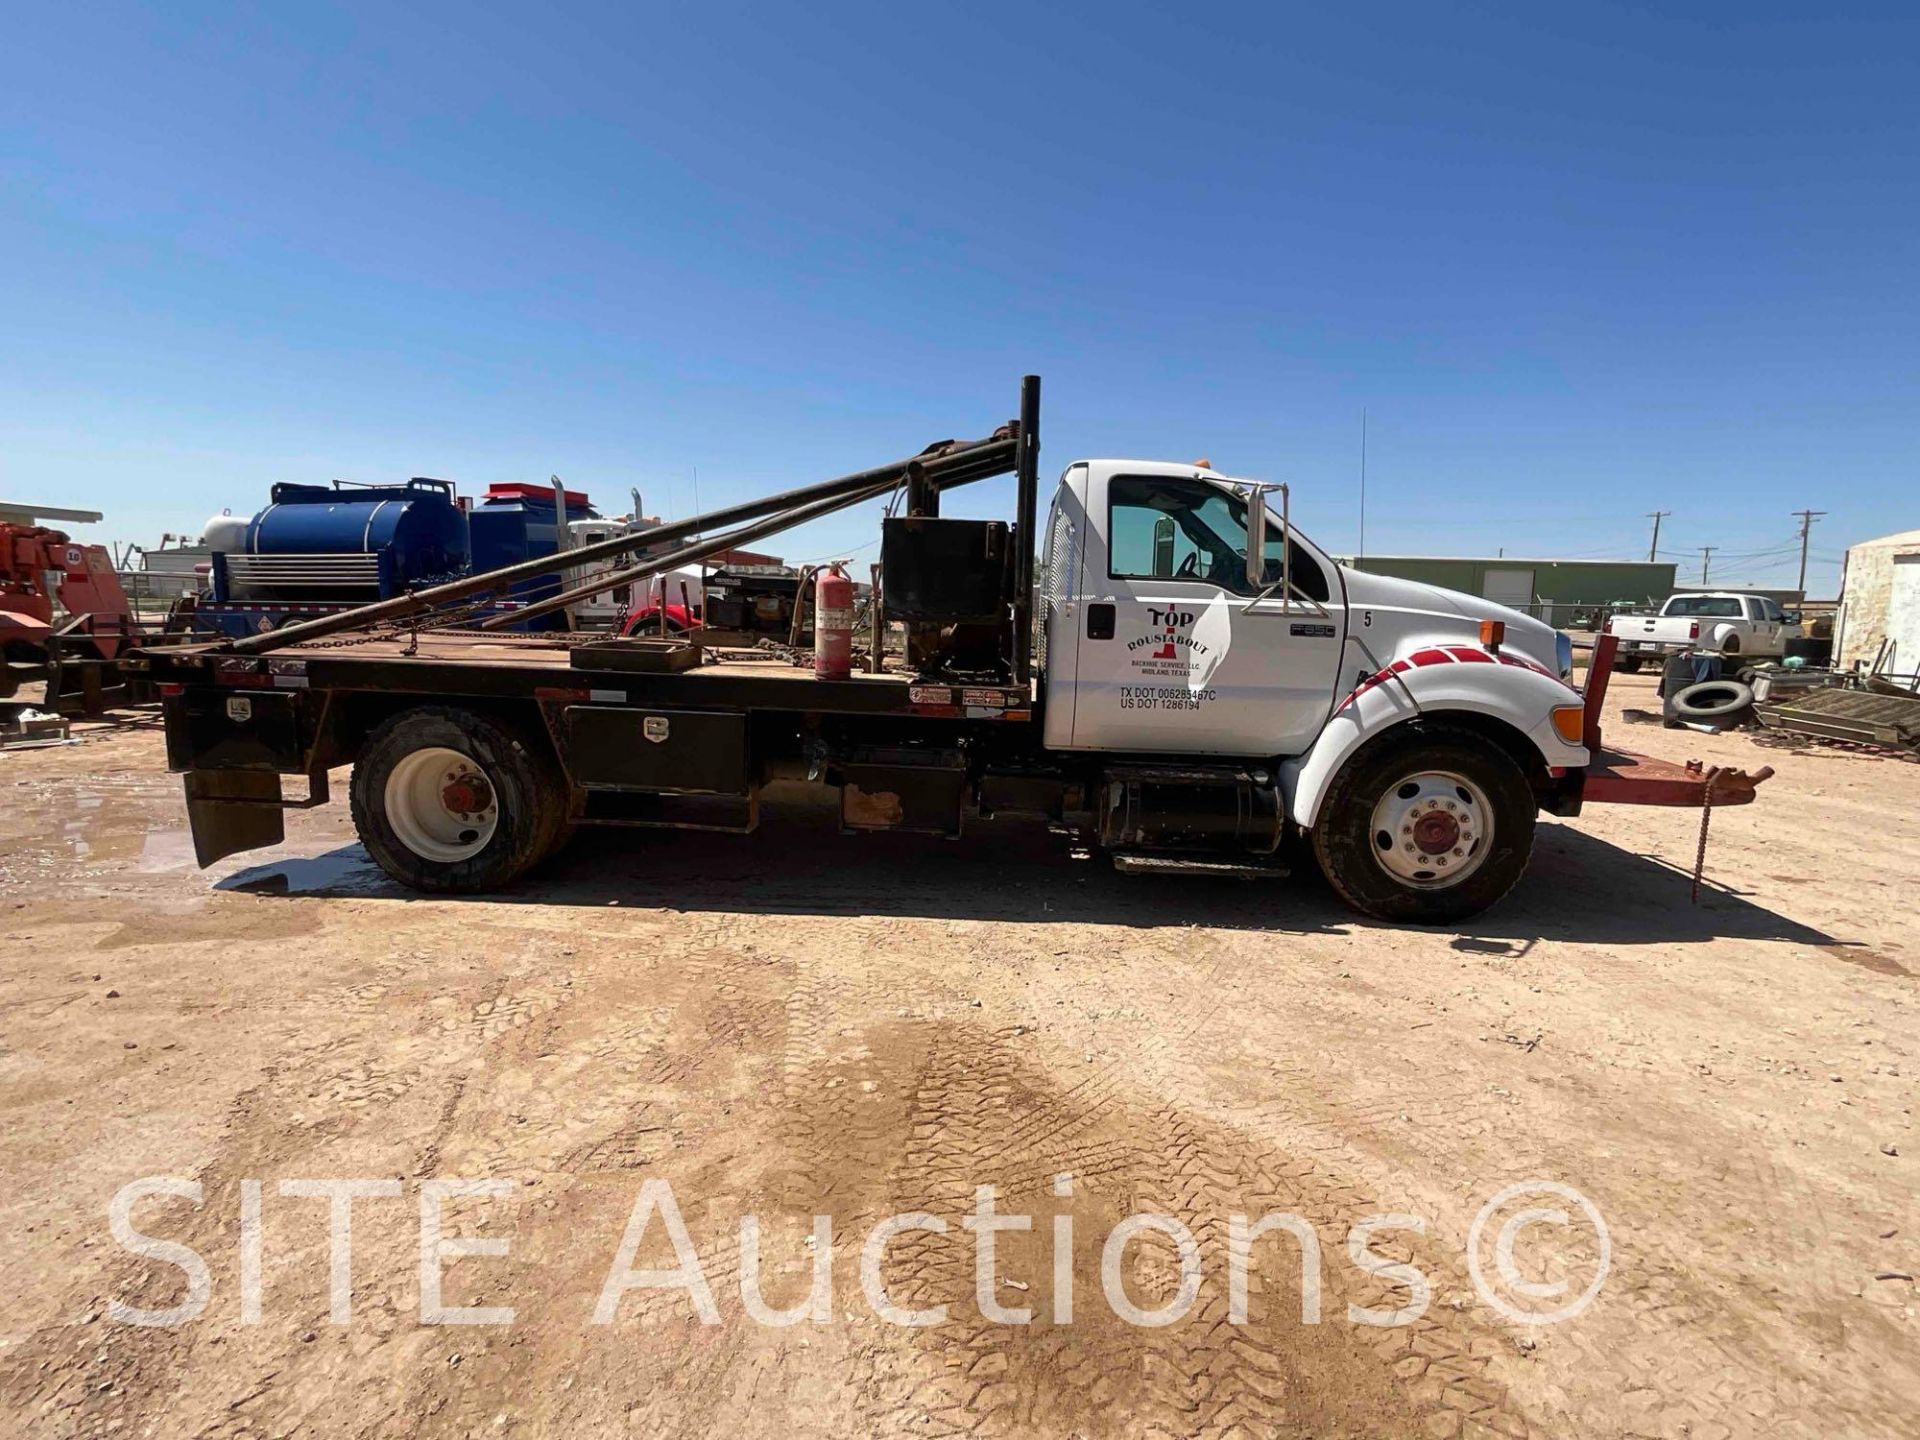 2013 Ford F650 SD Gin Pole Truck - Image 3 of 19